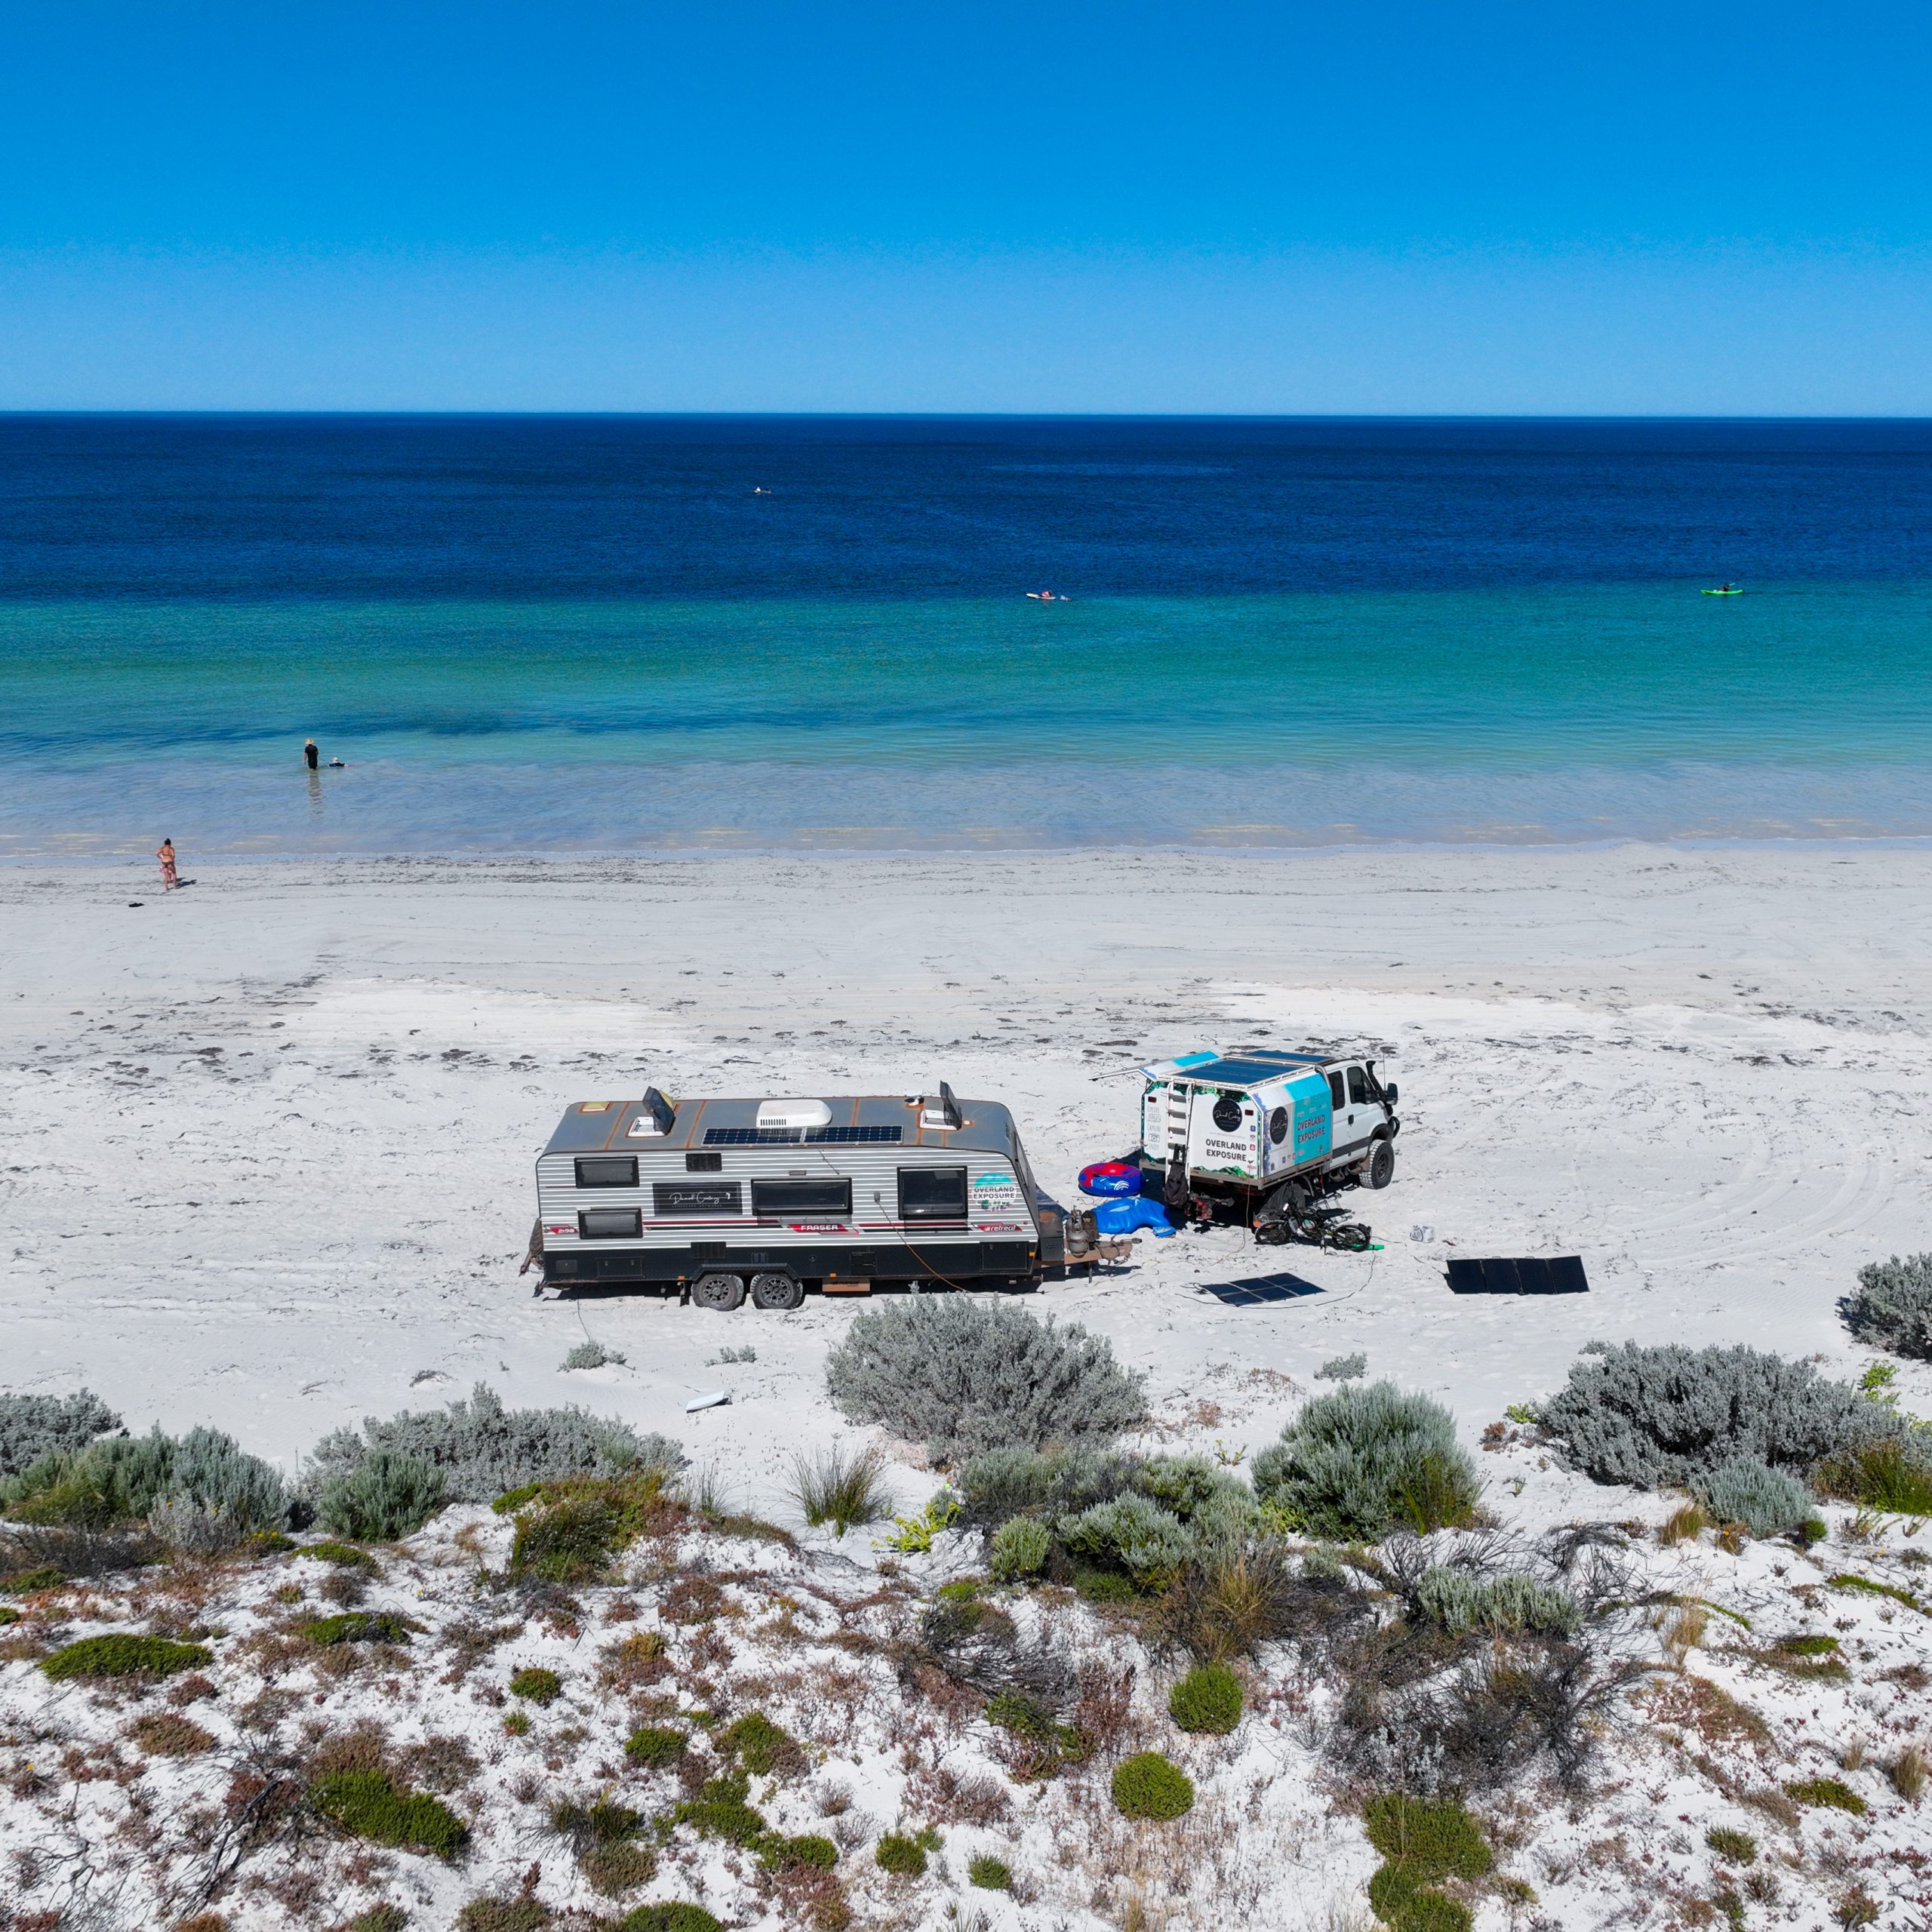 Guide to Free Camping and Caravanning the Yorke Peninsula, South Australia